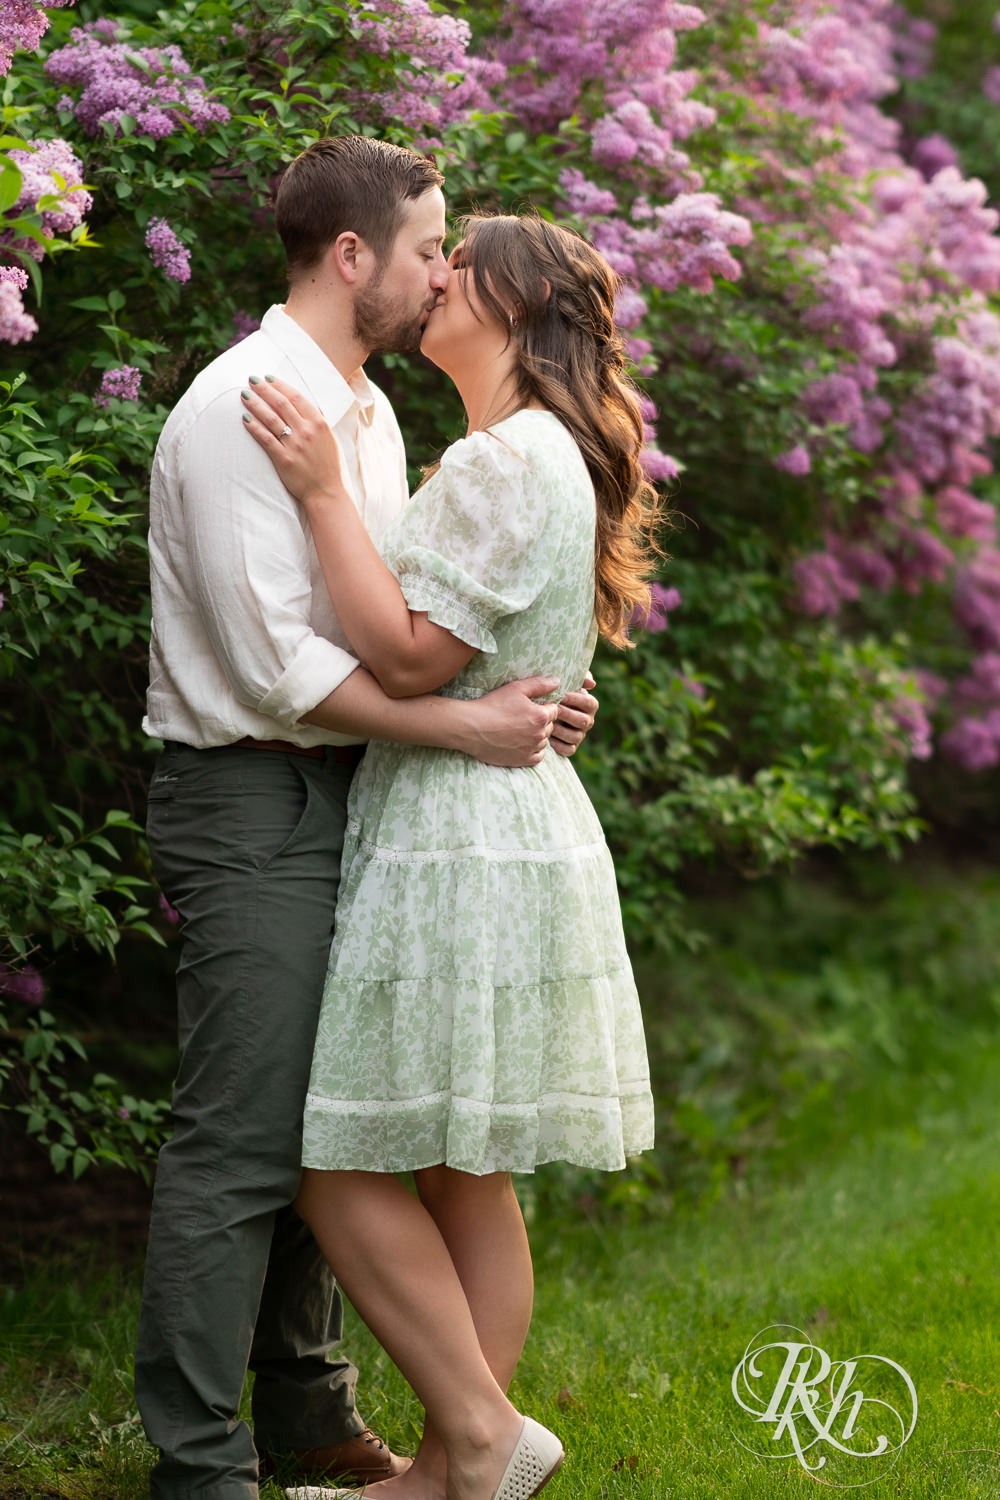 Man in white shirt and woman in green kiss in front of lilacs during engagement photography at the Minnesota Landscape Arboretum in Chaska, Minnesota.